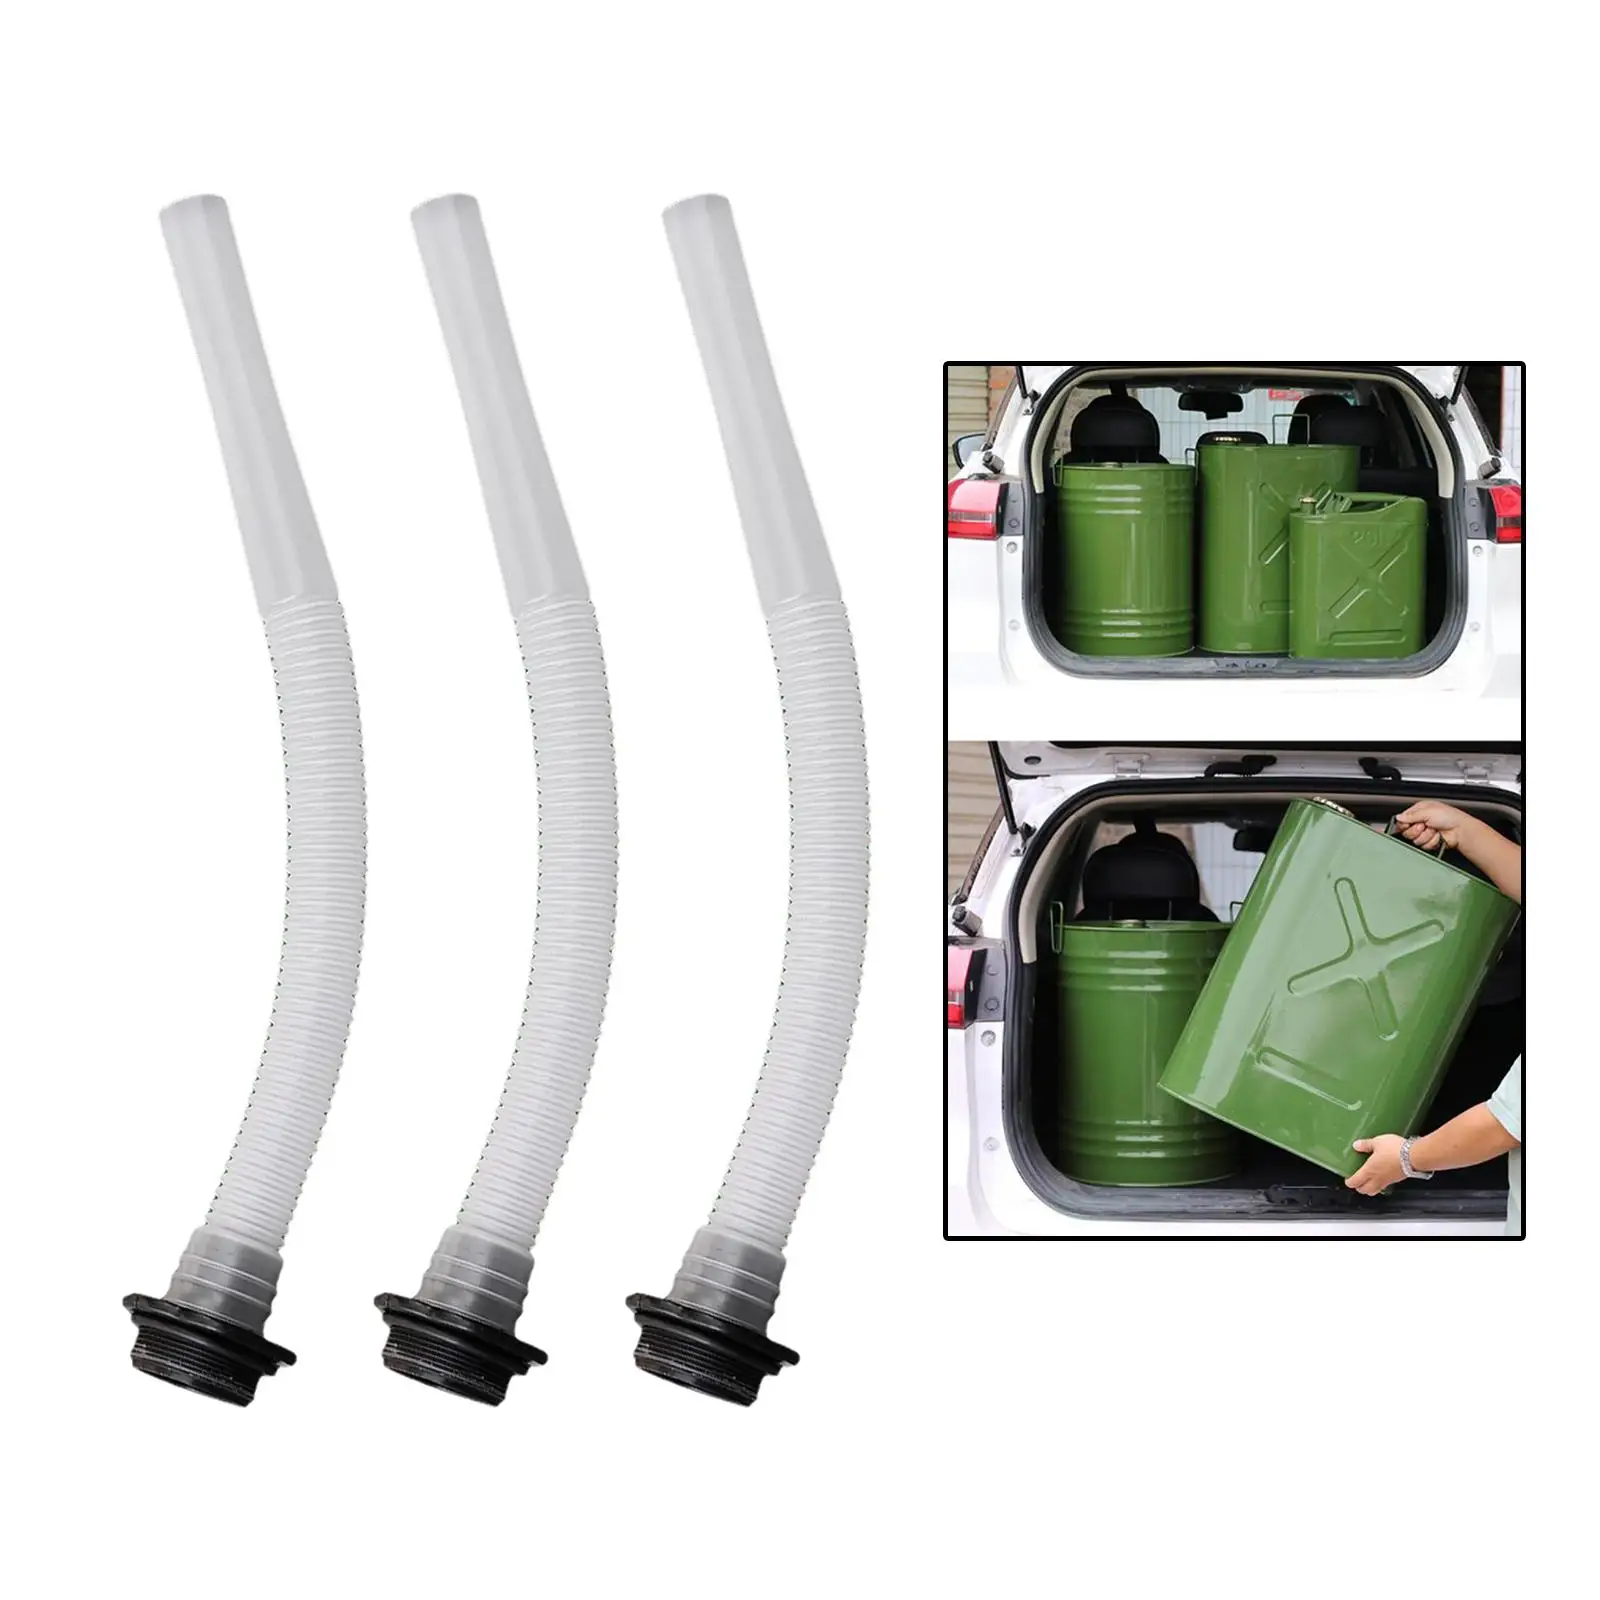 3Pcs 13inch Fuel Tanks Pouring Nozzle Vehicle Equipment Motorcycle Accessories Garage Tool Leakproof Petrol Cans Flexible Tube